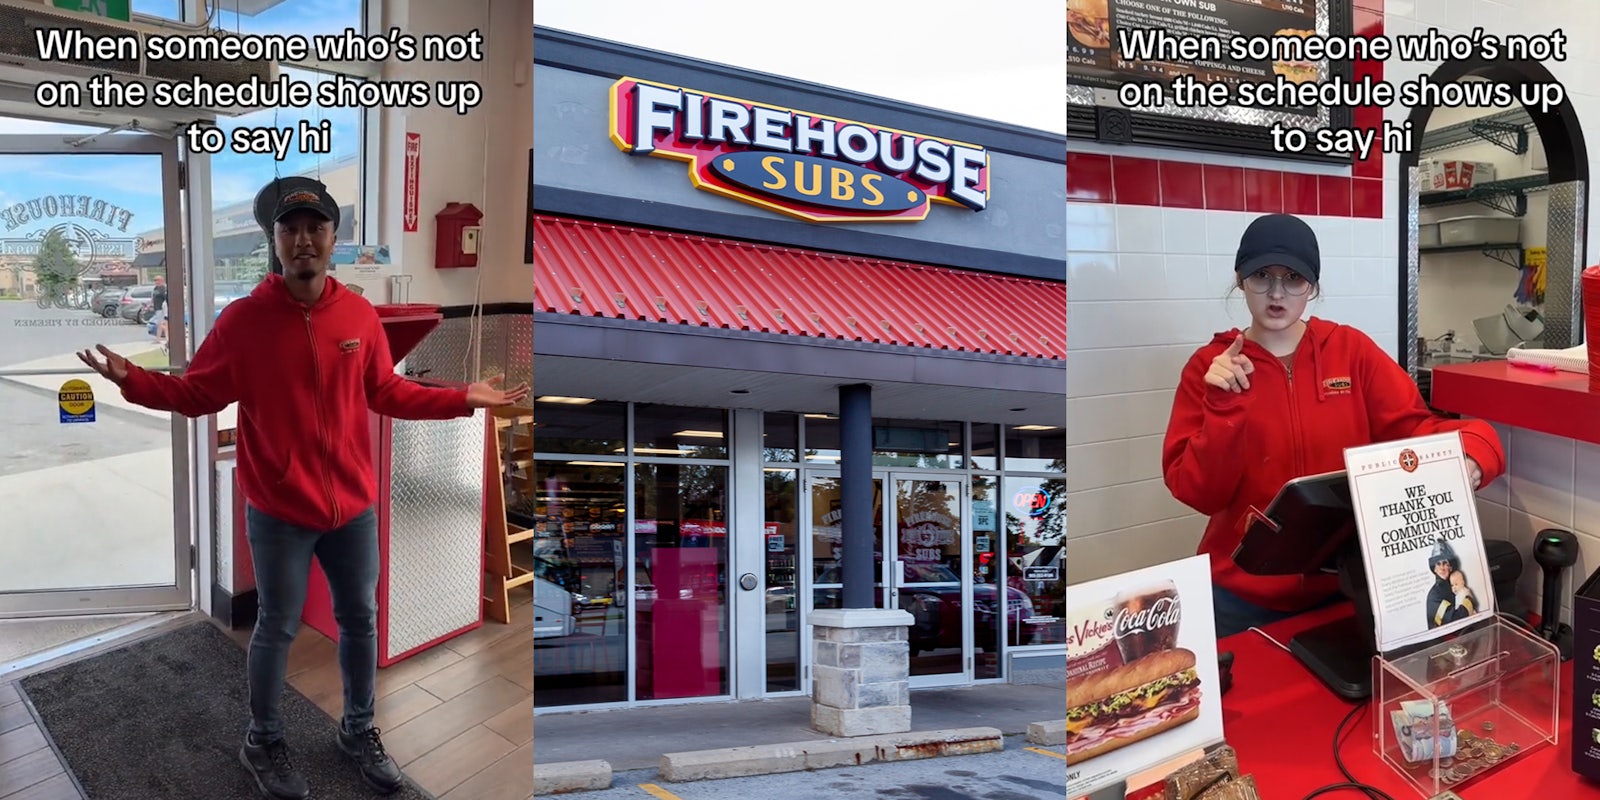 Firehouse Subs employee with caption 'When someone who's not on the schedule shows up to say hi' (l) Firehouse Subs building with sign (c) Firehouse Subs employee with caption 'When someone who's not on the schedule shows up to say hi' (r)